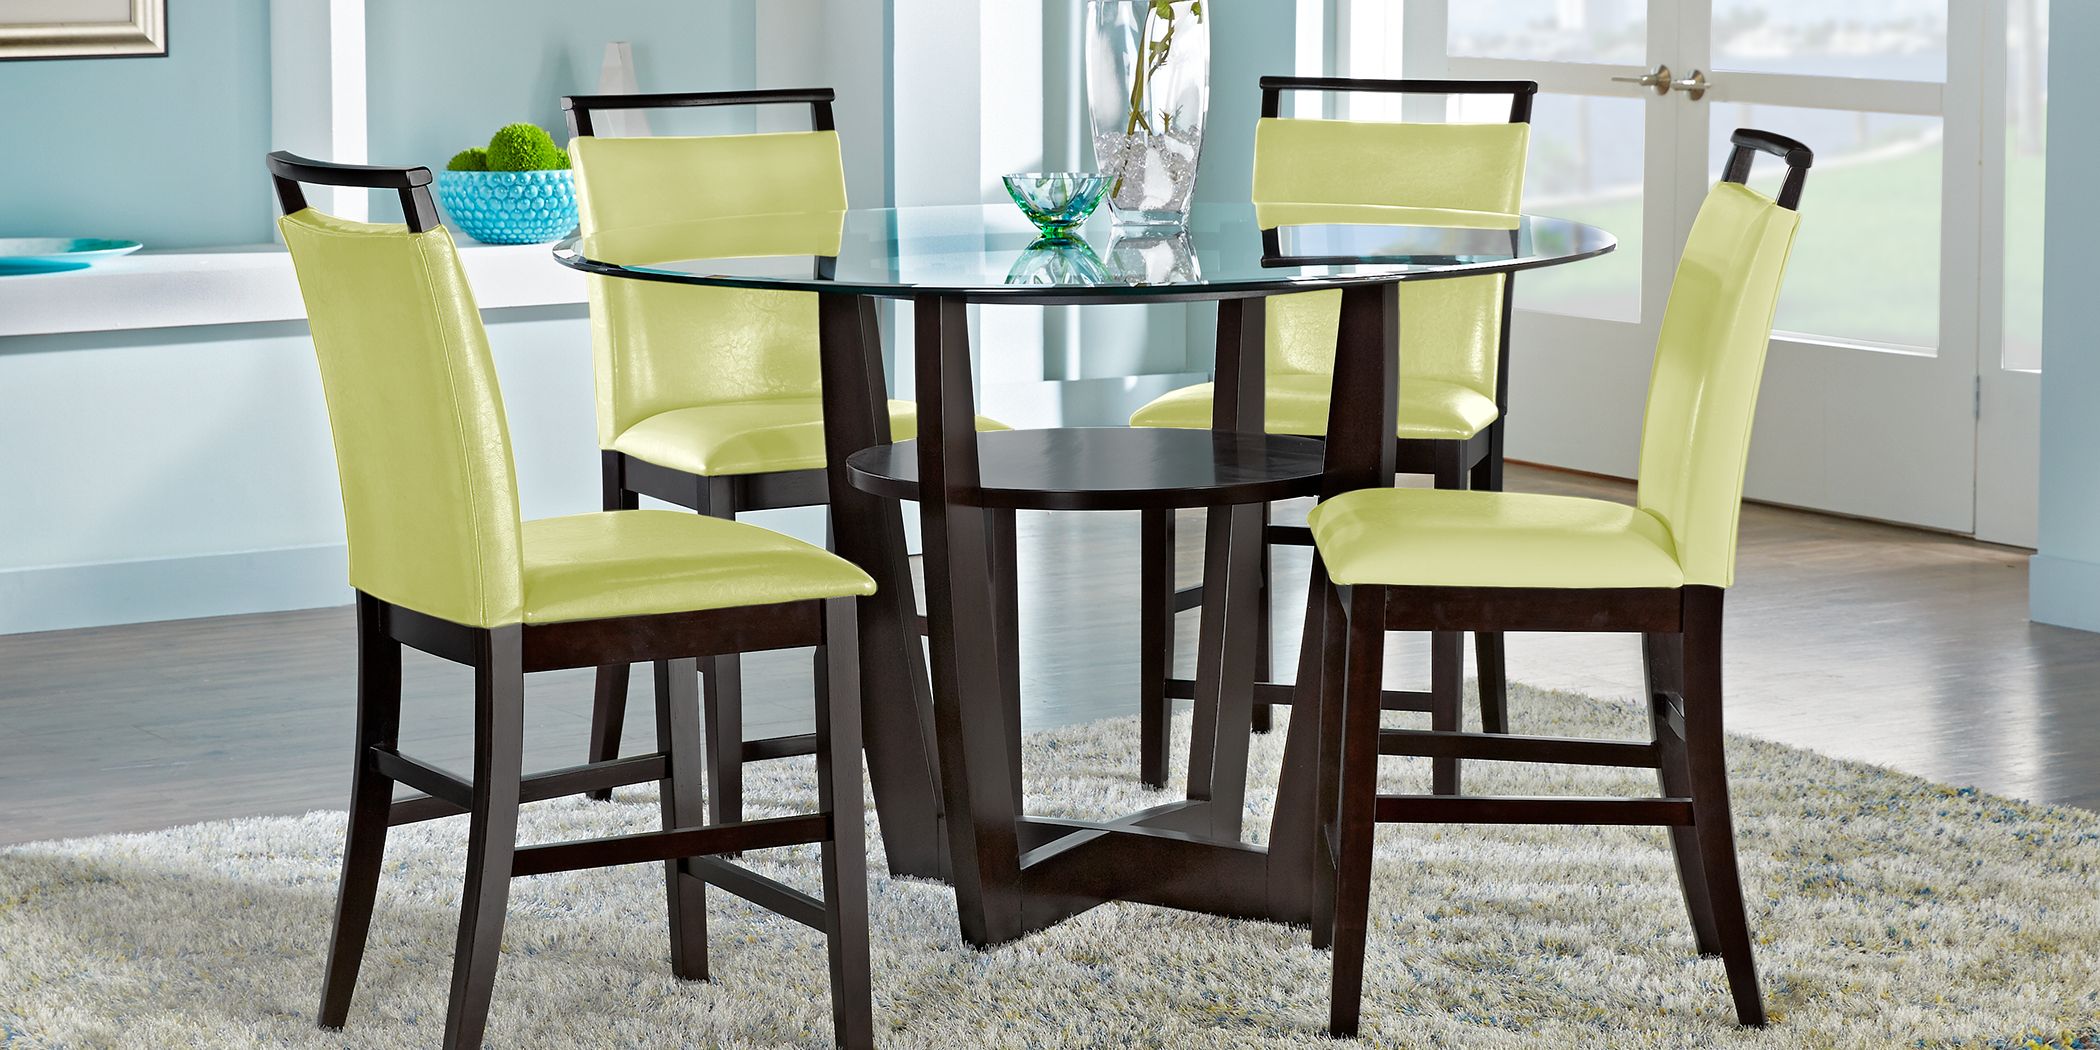 Glass Top Dining Room Table Sets For, Round High Top Dining Table And Chairs